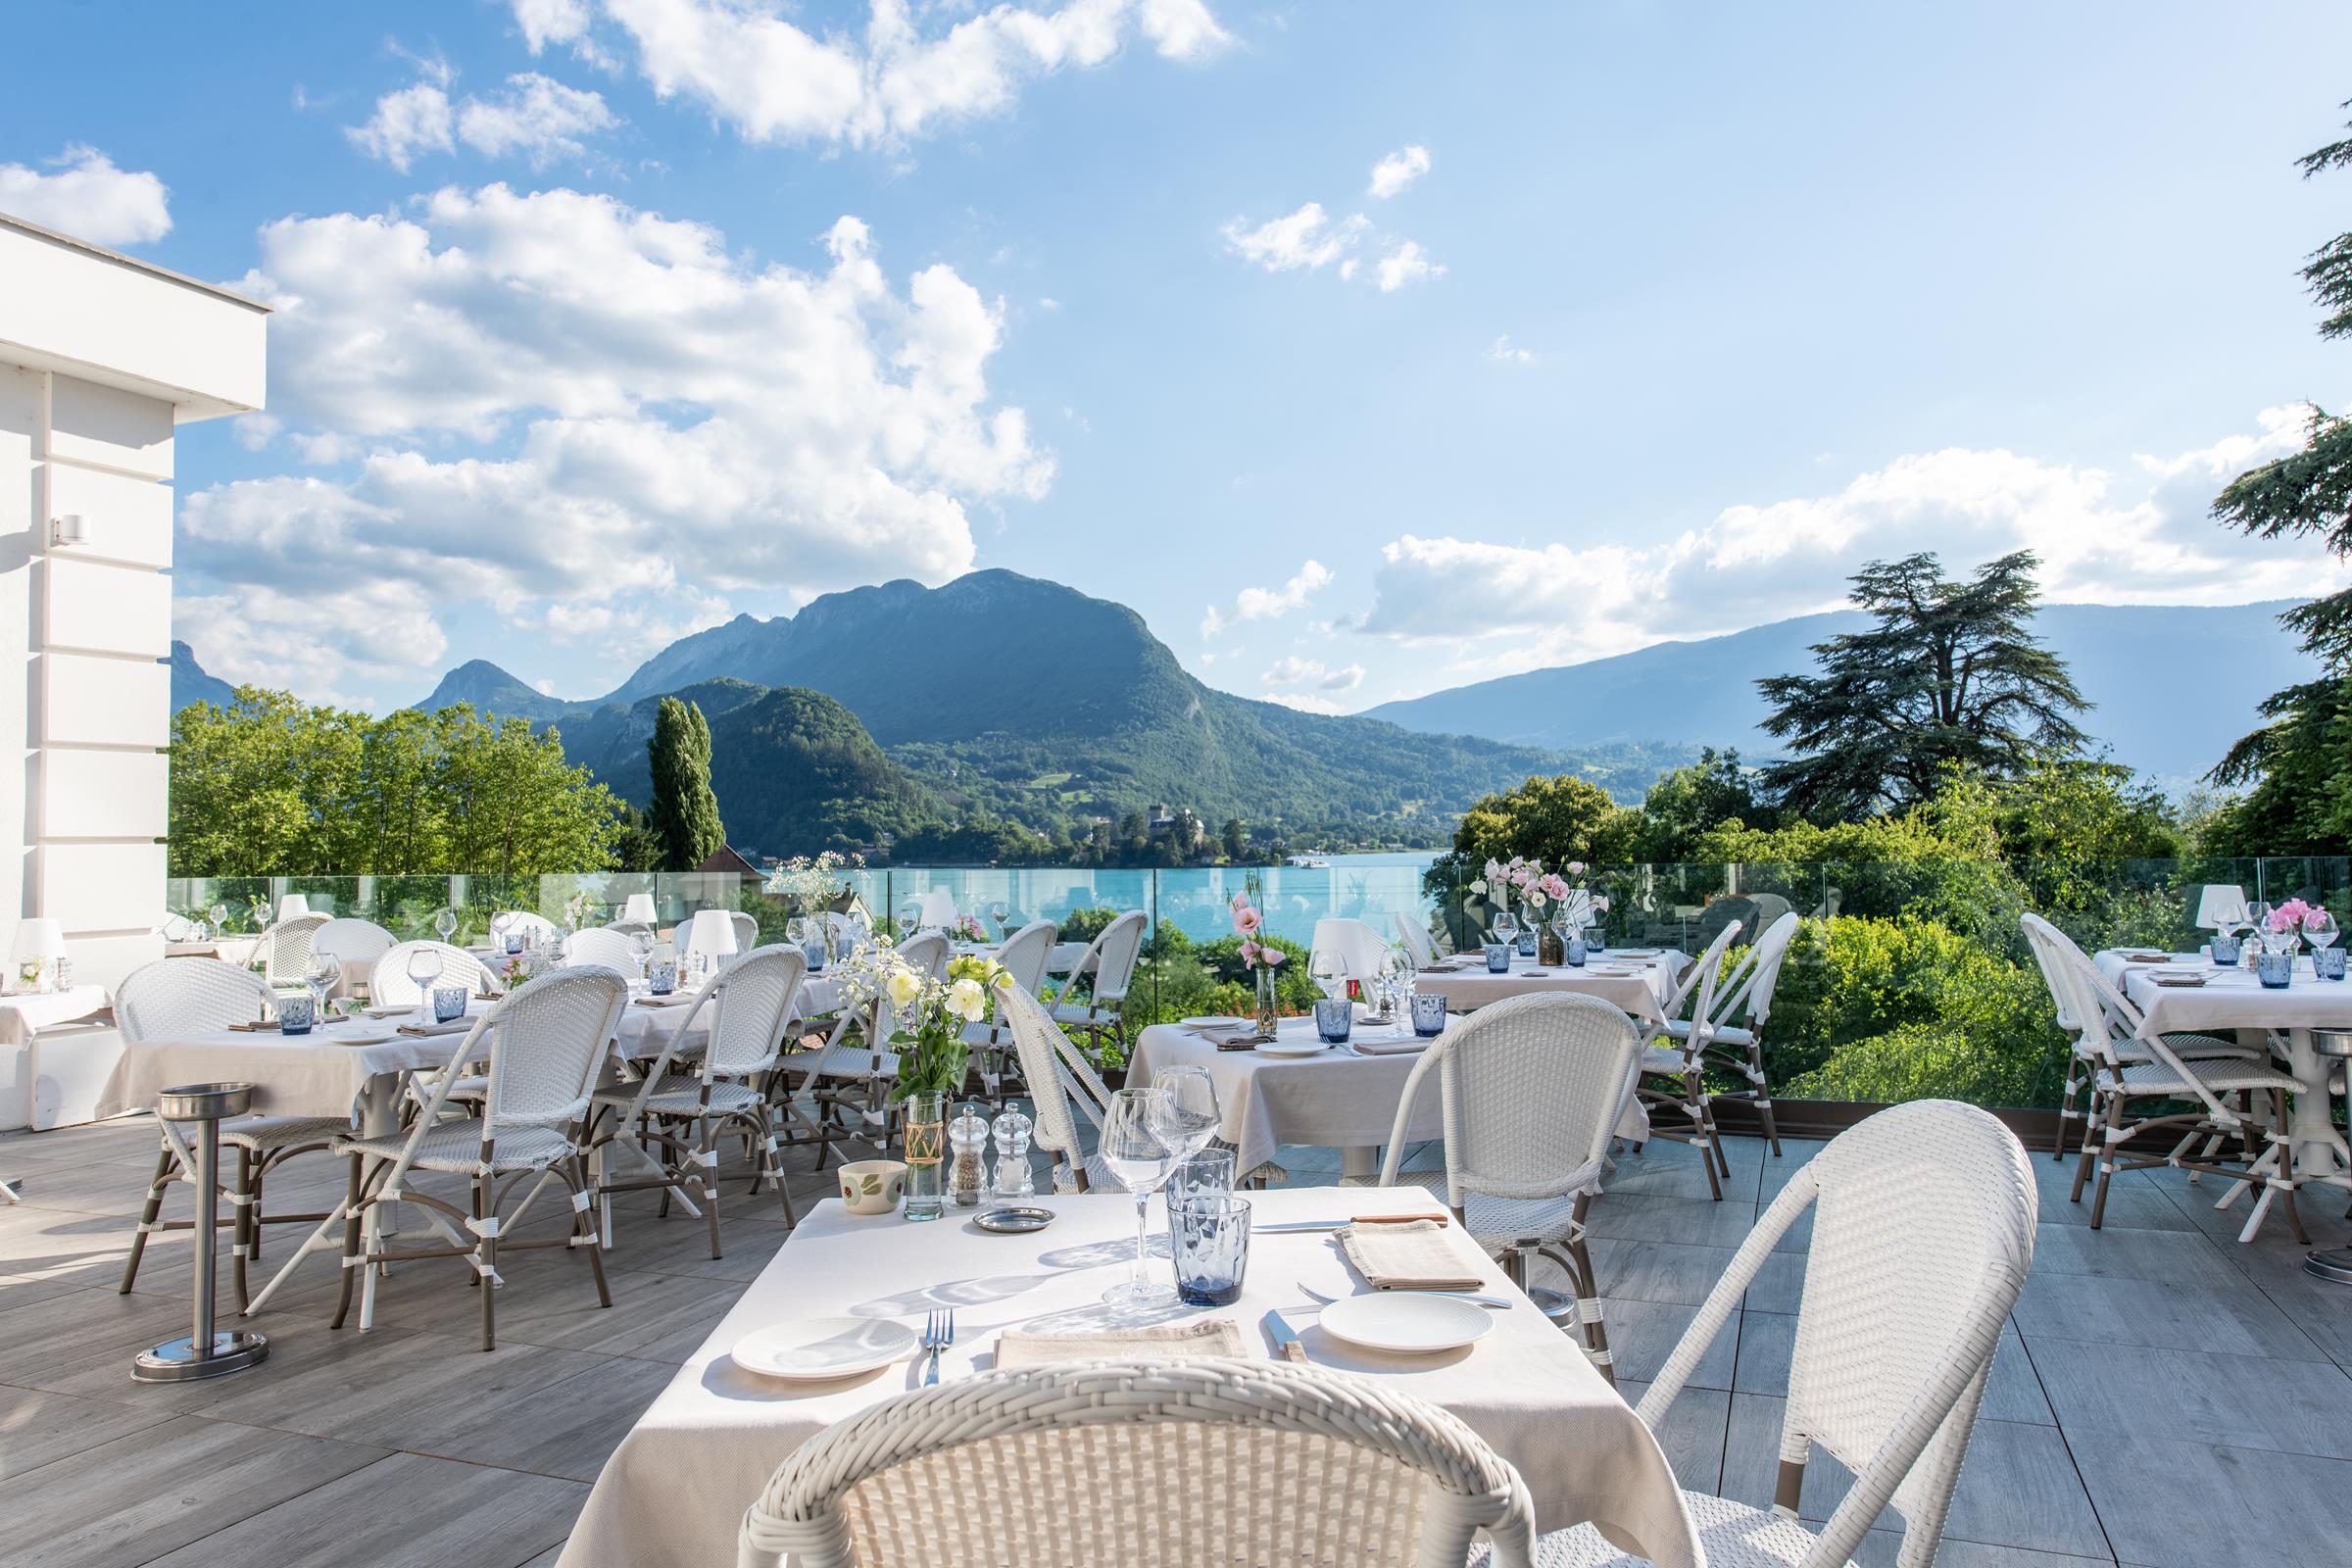 A relaxing afternoon and gourmet dining experience at Beau Site Talloires